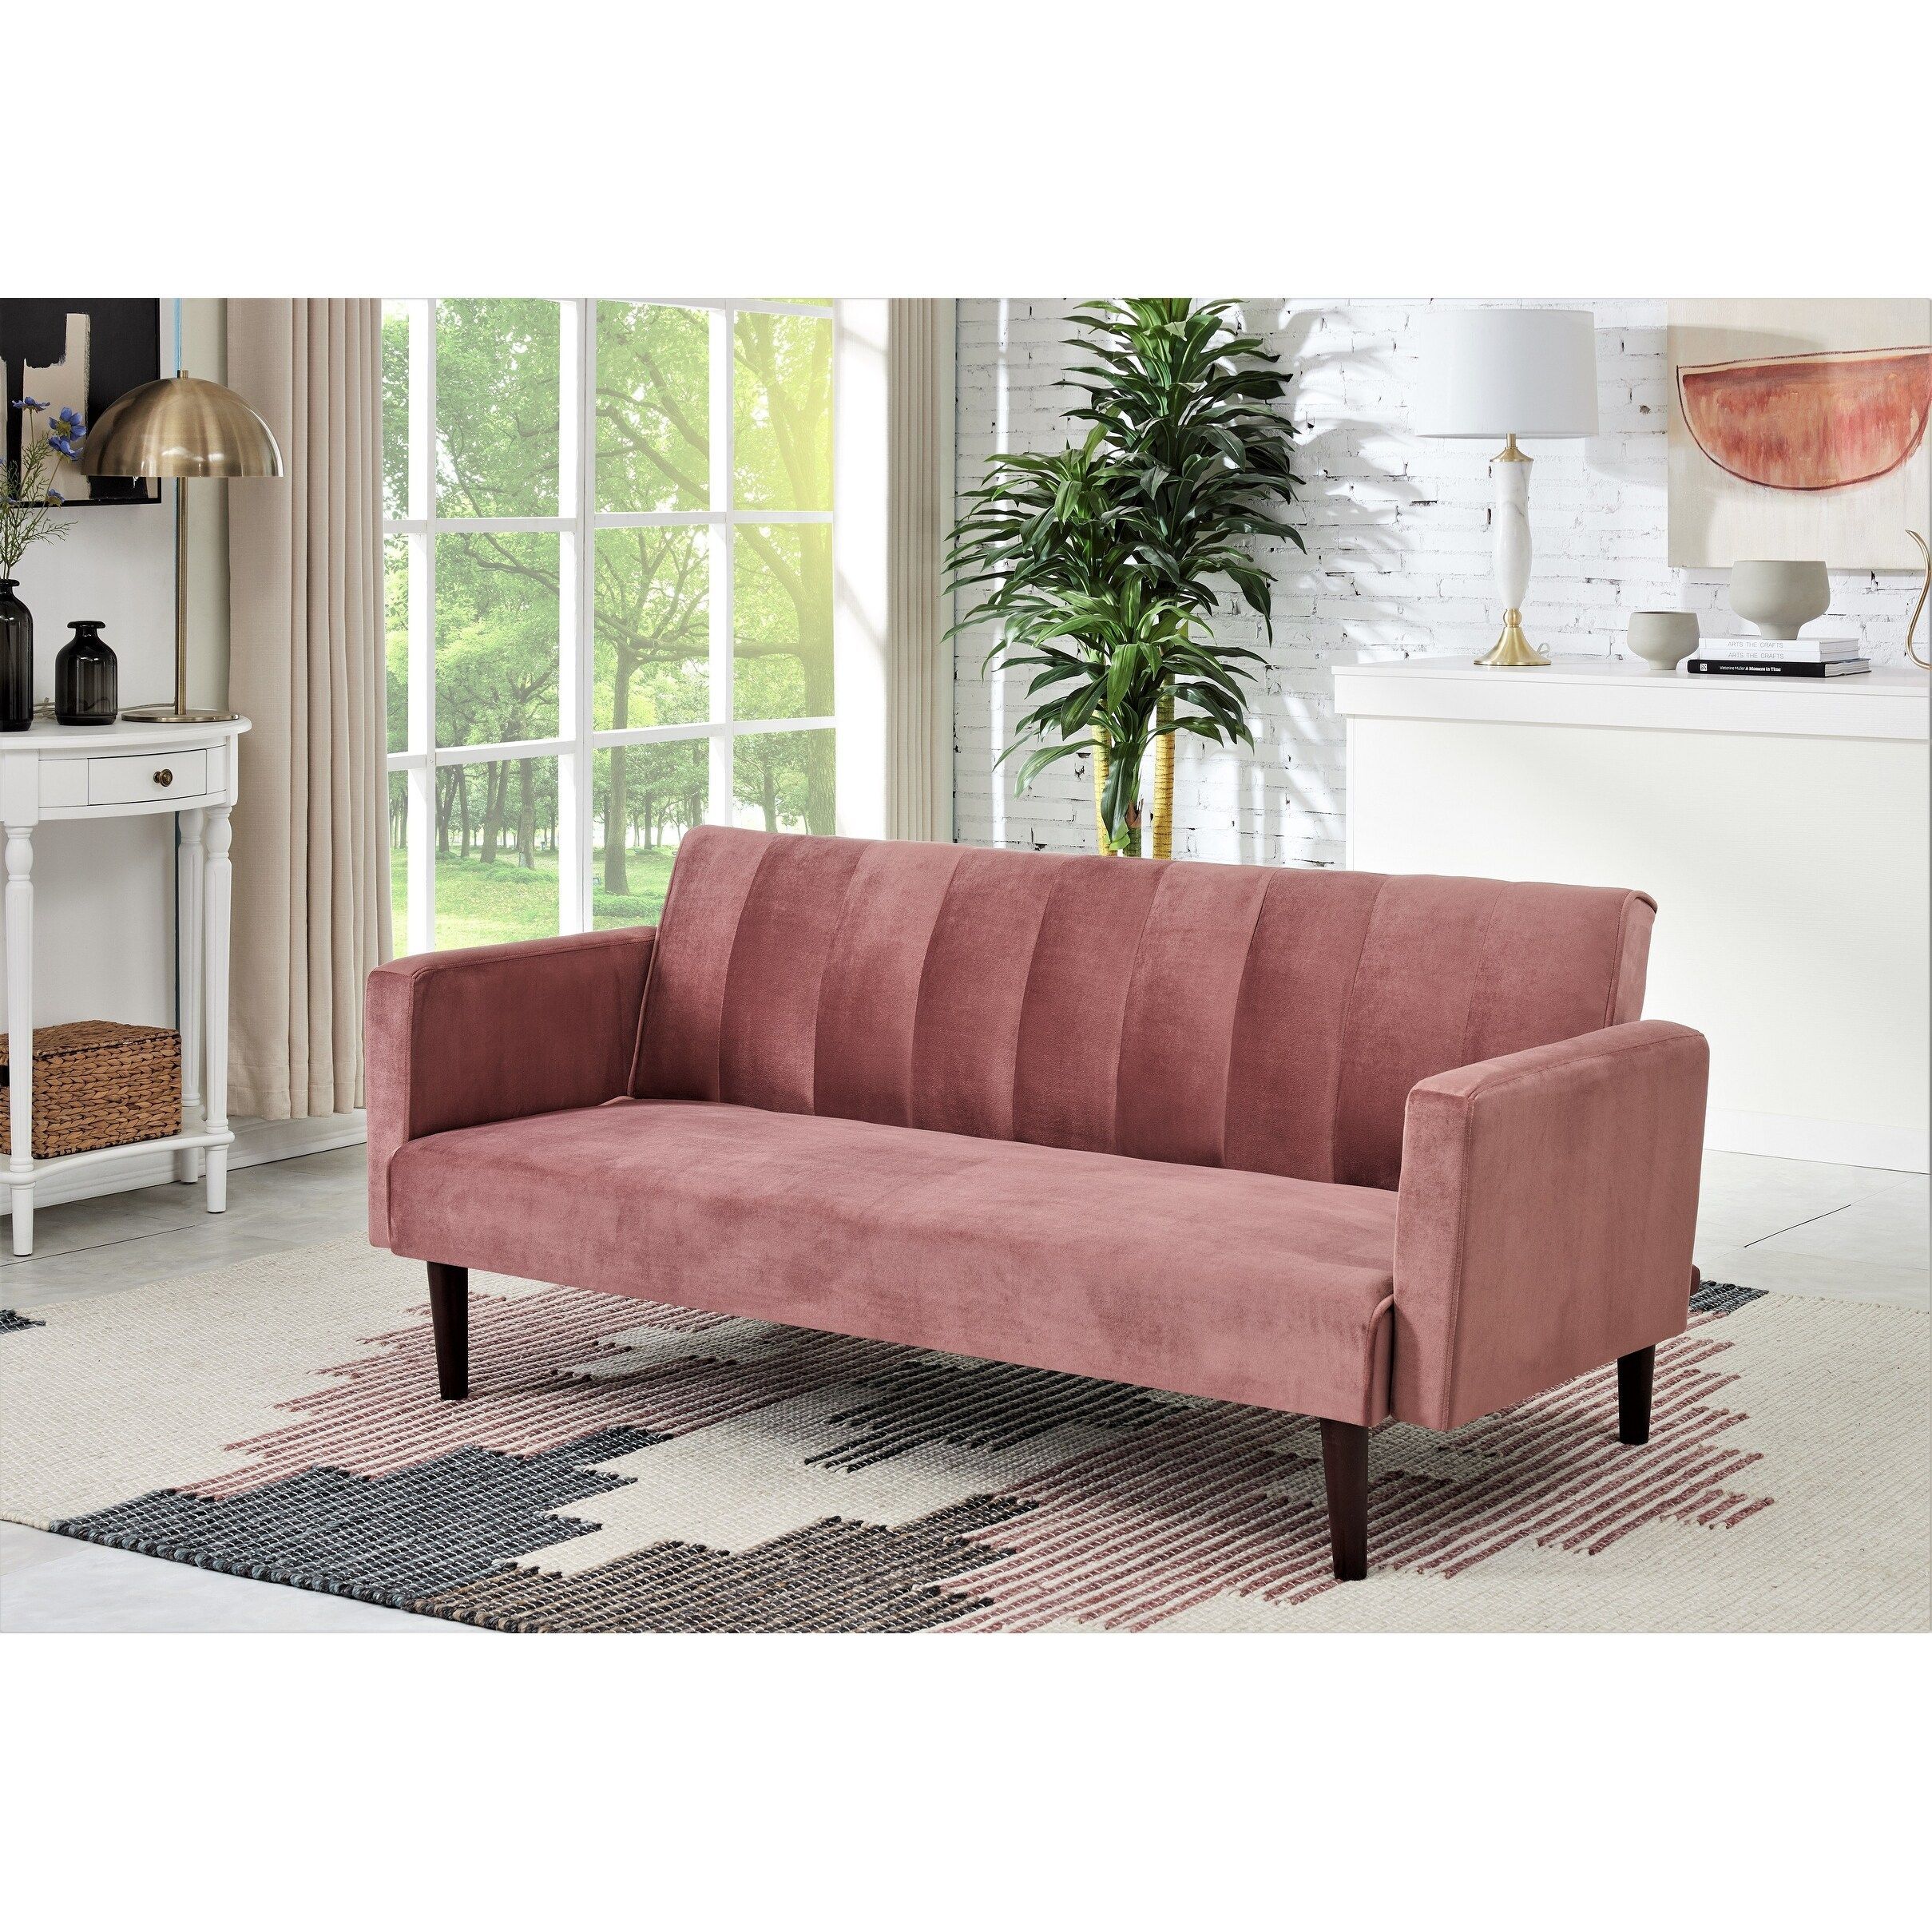 Container Furniture Srtip Convertible Velvet Sofa Bed – Overstock Inside 66" Convertible Velvet Sofa Beds (Gallery 4 of 20)